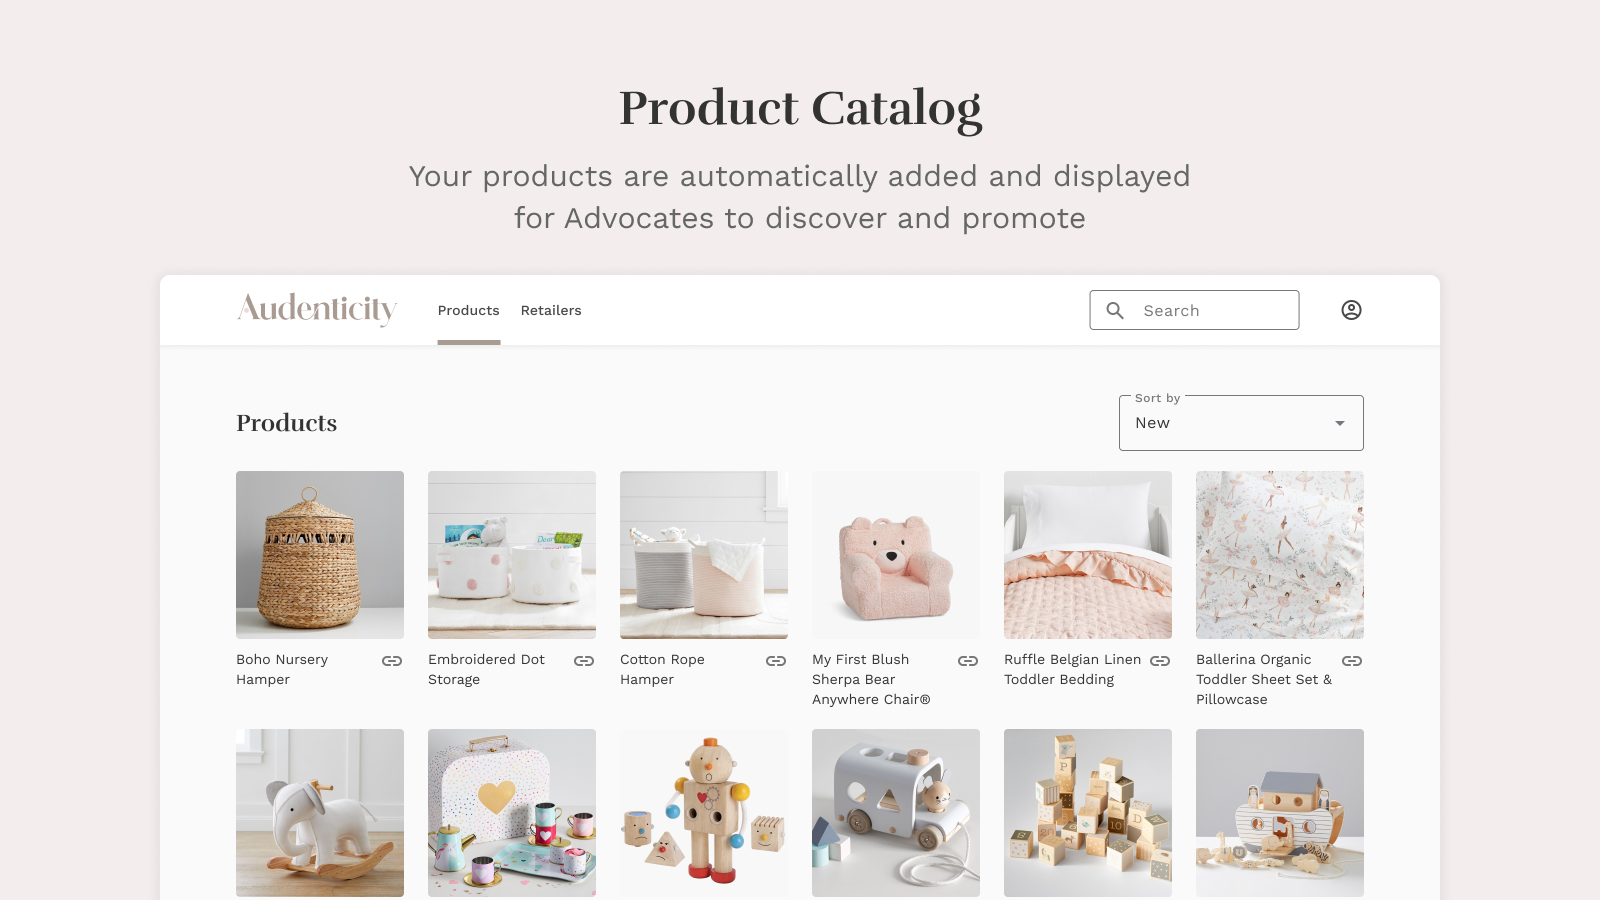 Advocates can discover your products in the Product Catalog